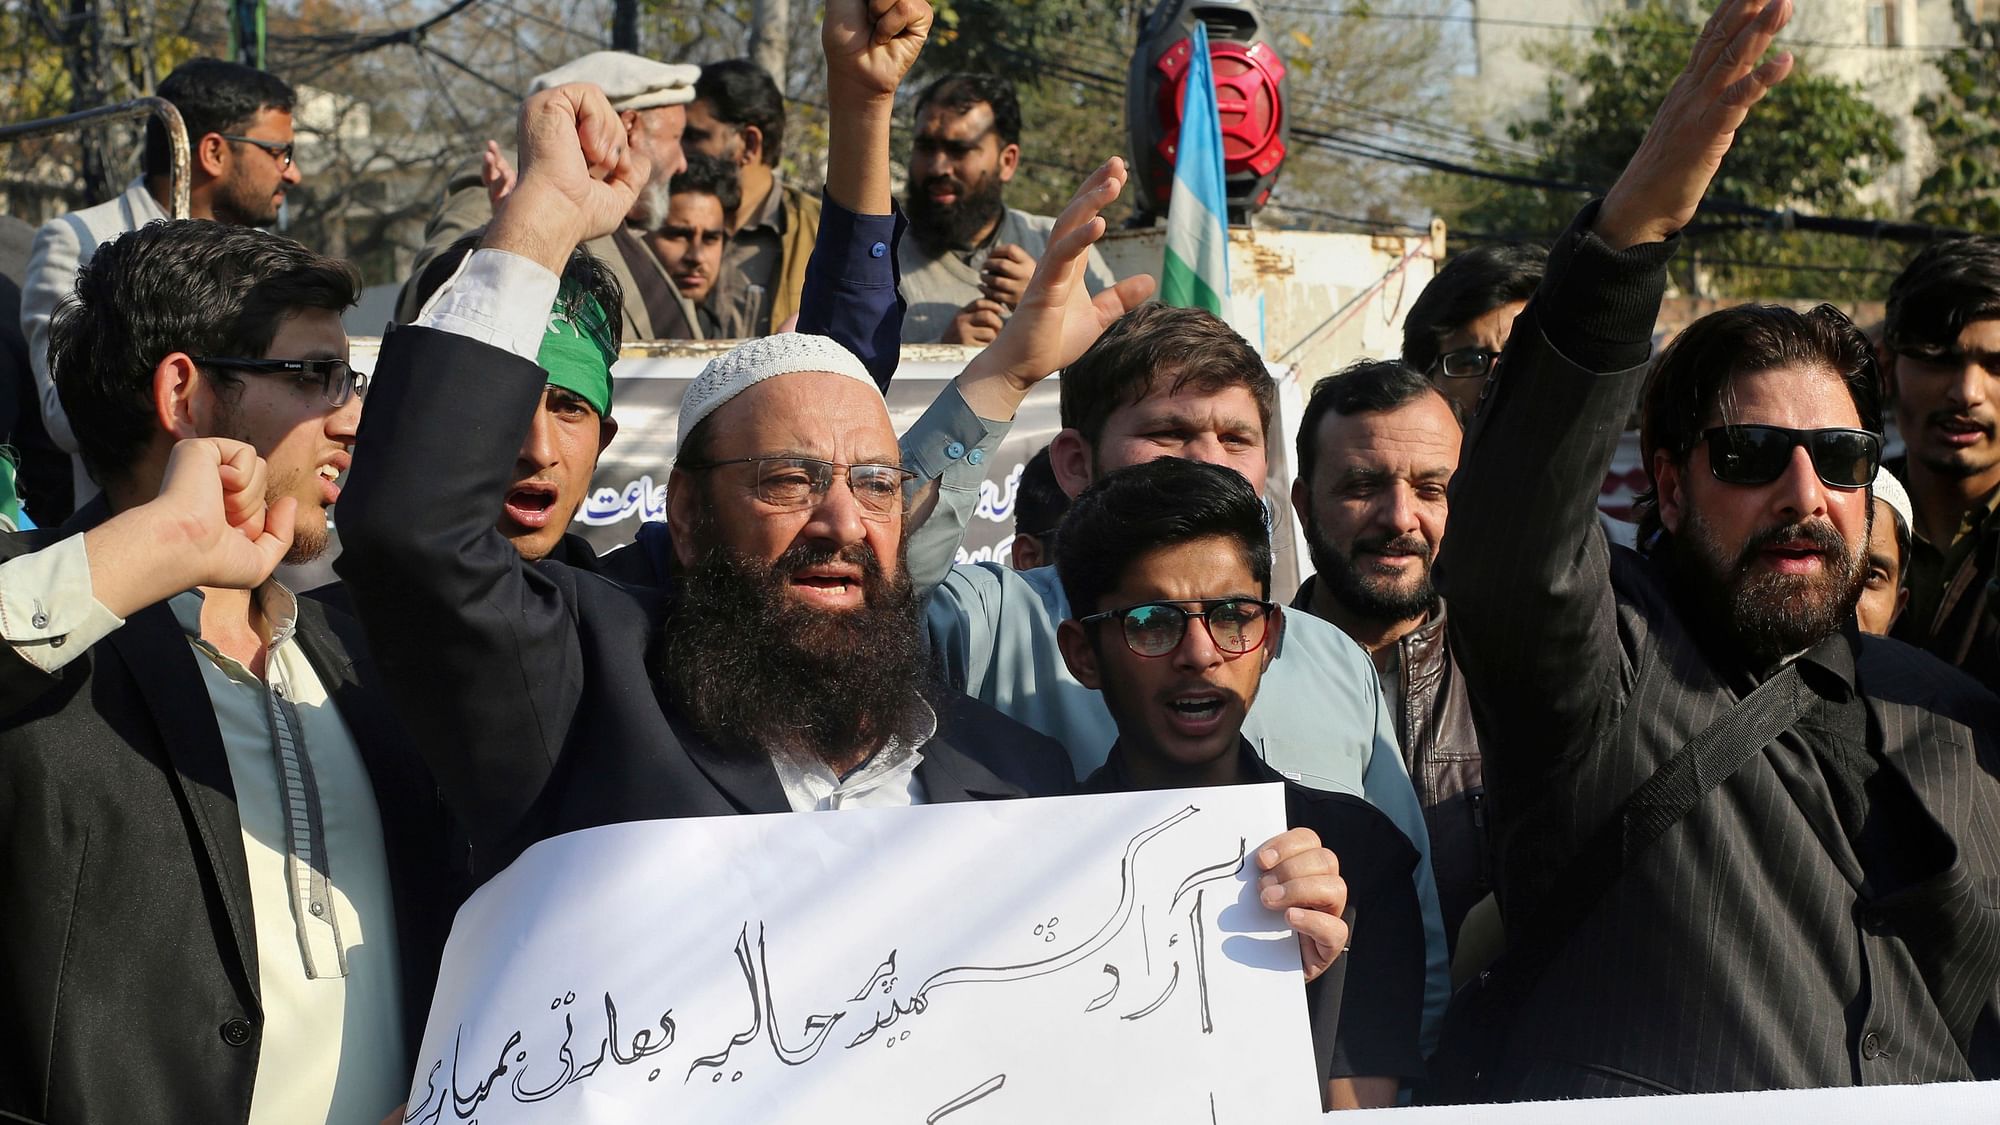 Supporters of Jamaat-e-Islami attend anti-India rally, with one holding a poster that reads, “we condemn the Indian attack,” in Lahore on 26 Feb 2019. Image used for representational purposes.